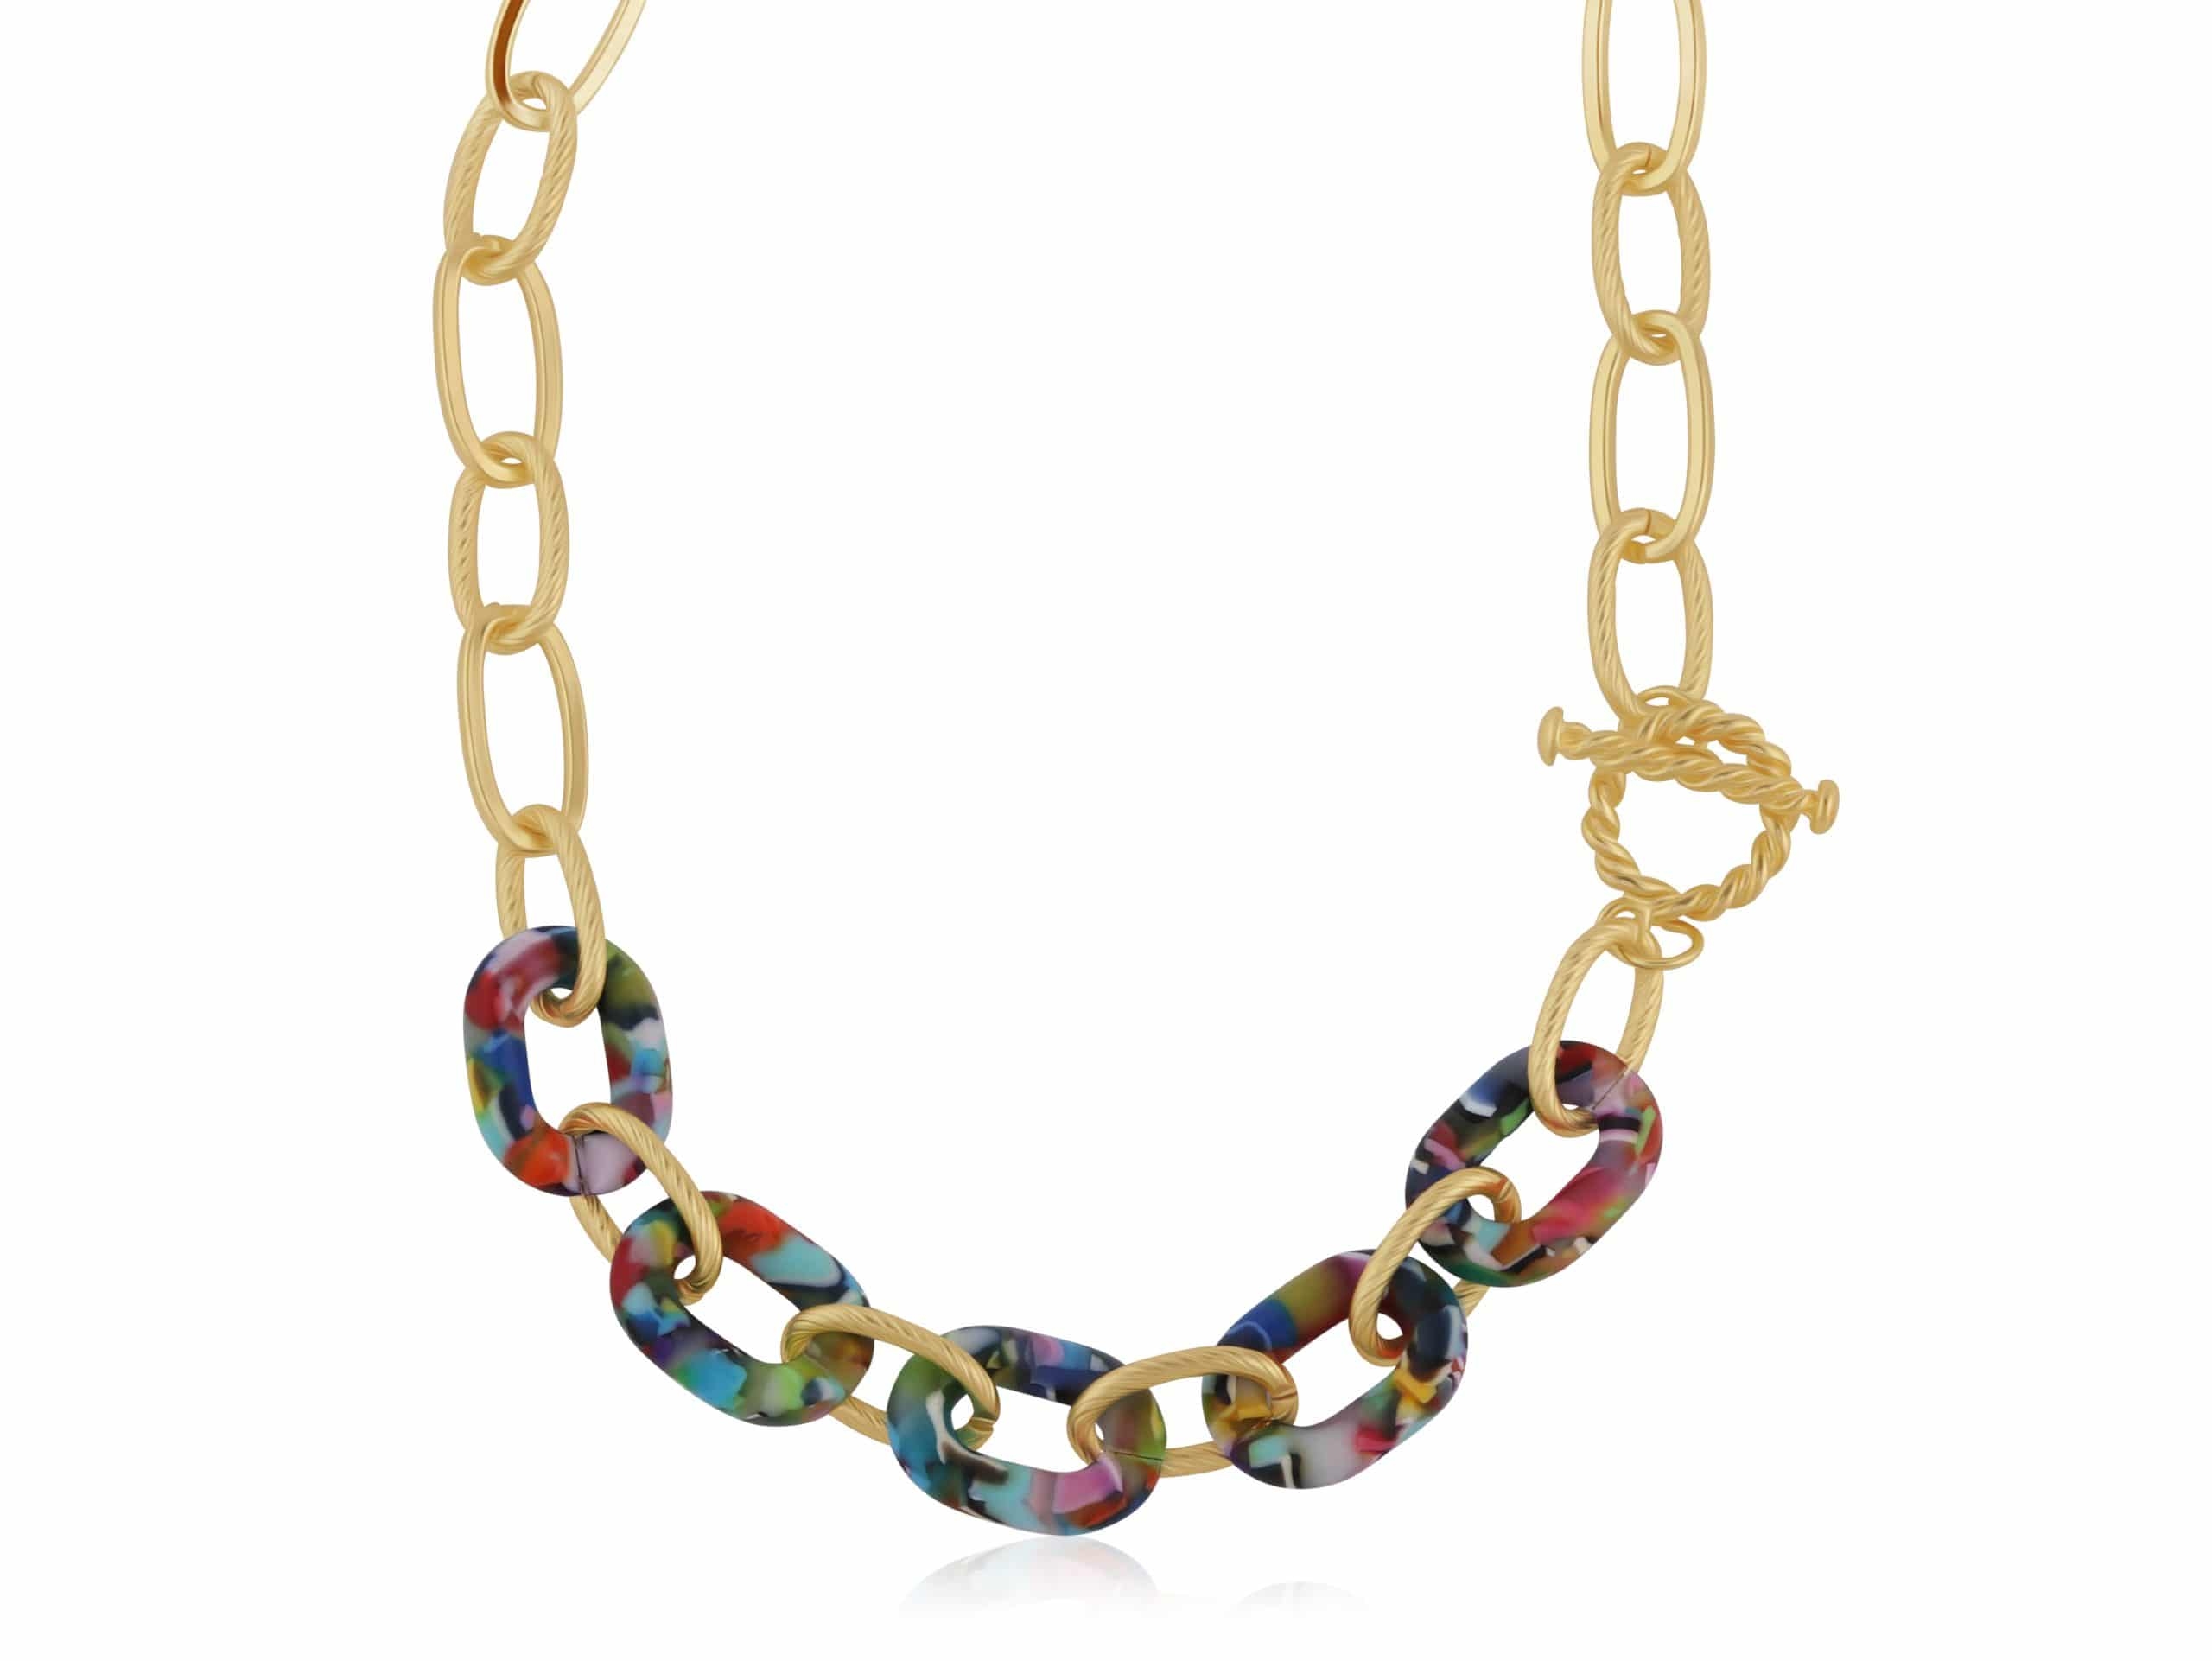 Amy Matte Resin Chain Necklace in Red, Orange and Lilac – Big Metal London